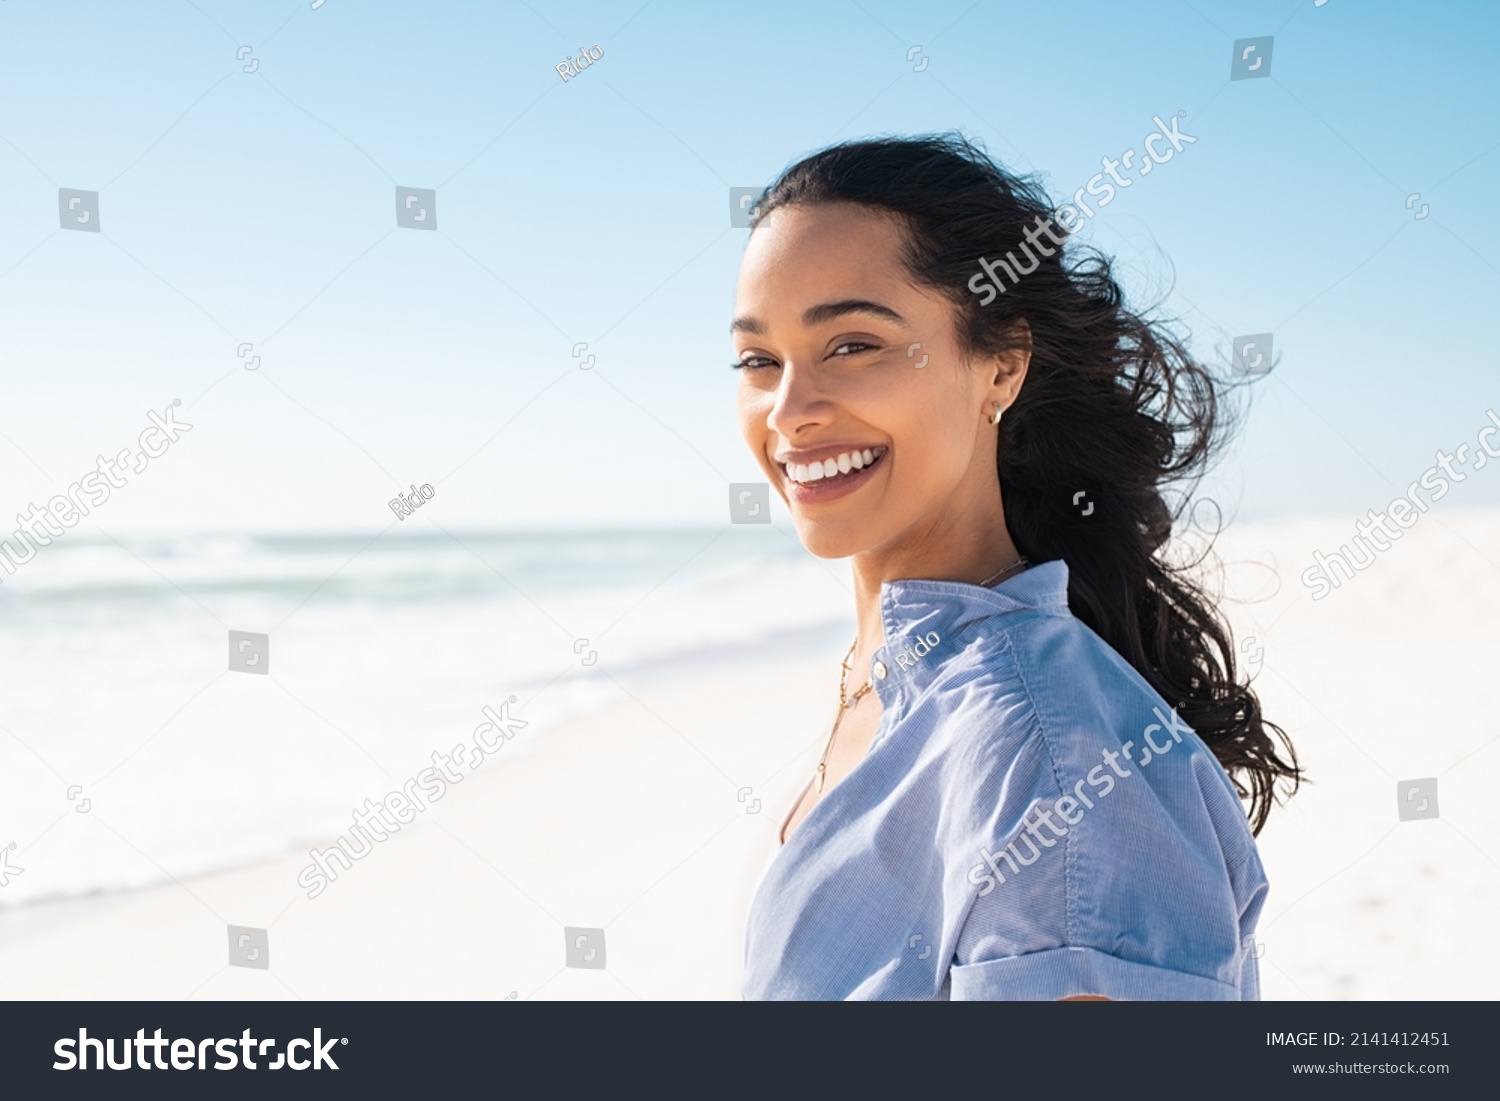 Portrait of young woman at sea looking at camera. Smiling latin hispanic girl standing at the beach with copy space and looking at camera. Happy mixed race girl in casual outfit with wind in her hair. #2141412451